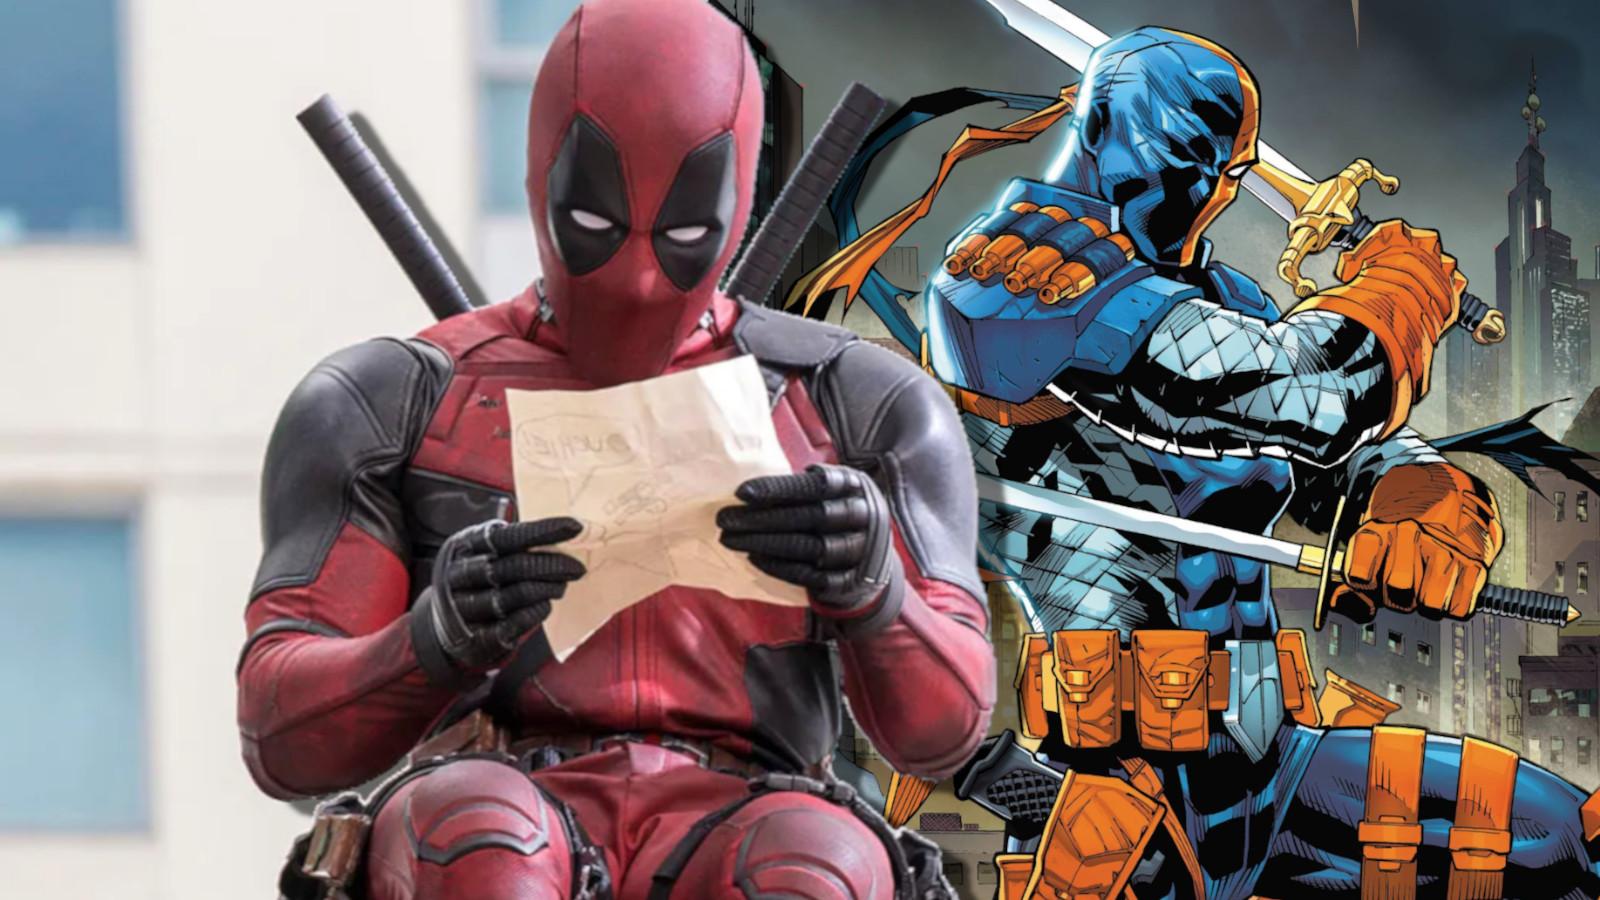 Deadpool from Marvel films & the Deathstroke Inc #8 cover